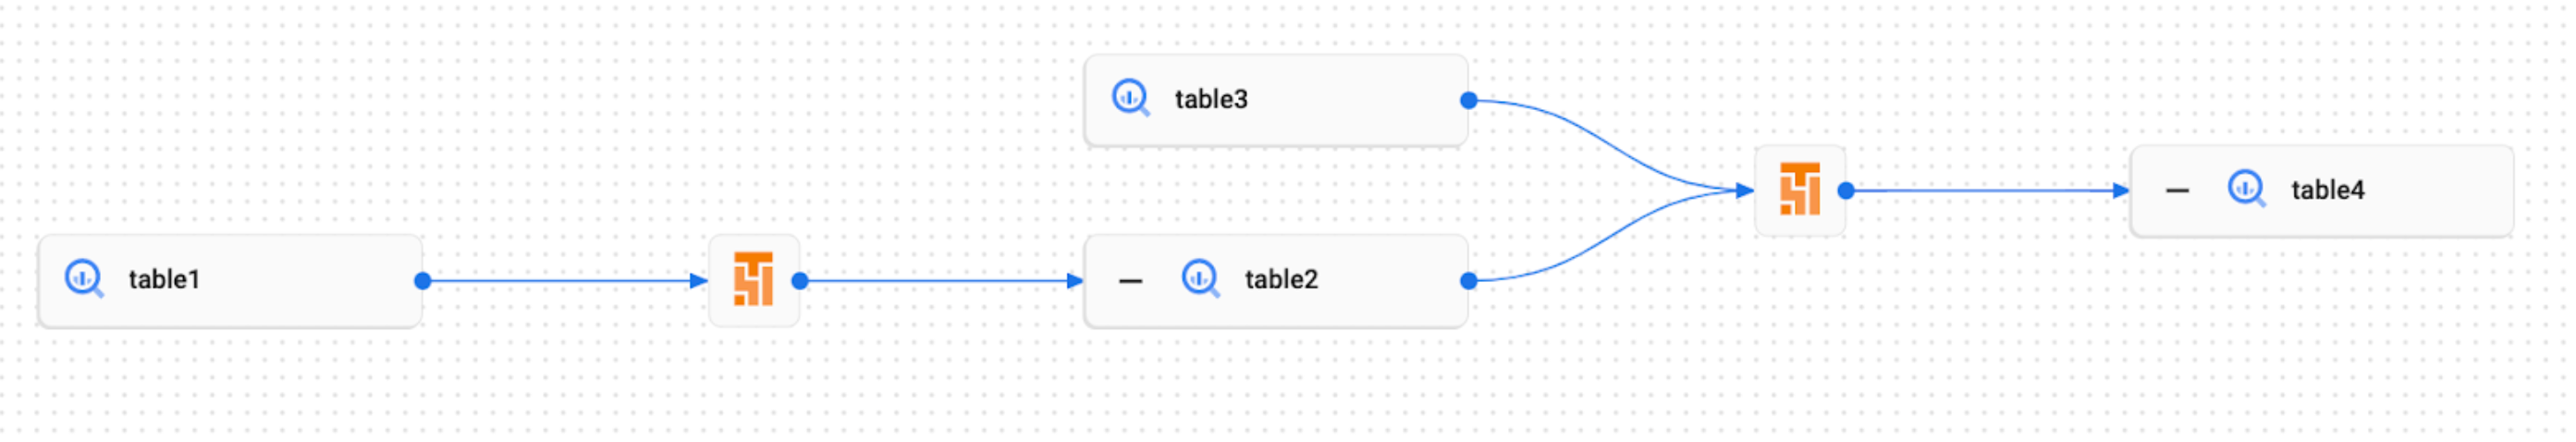 Example lineage graph for custom events in Dataplex UI.